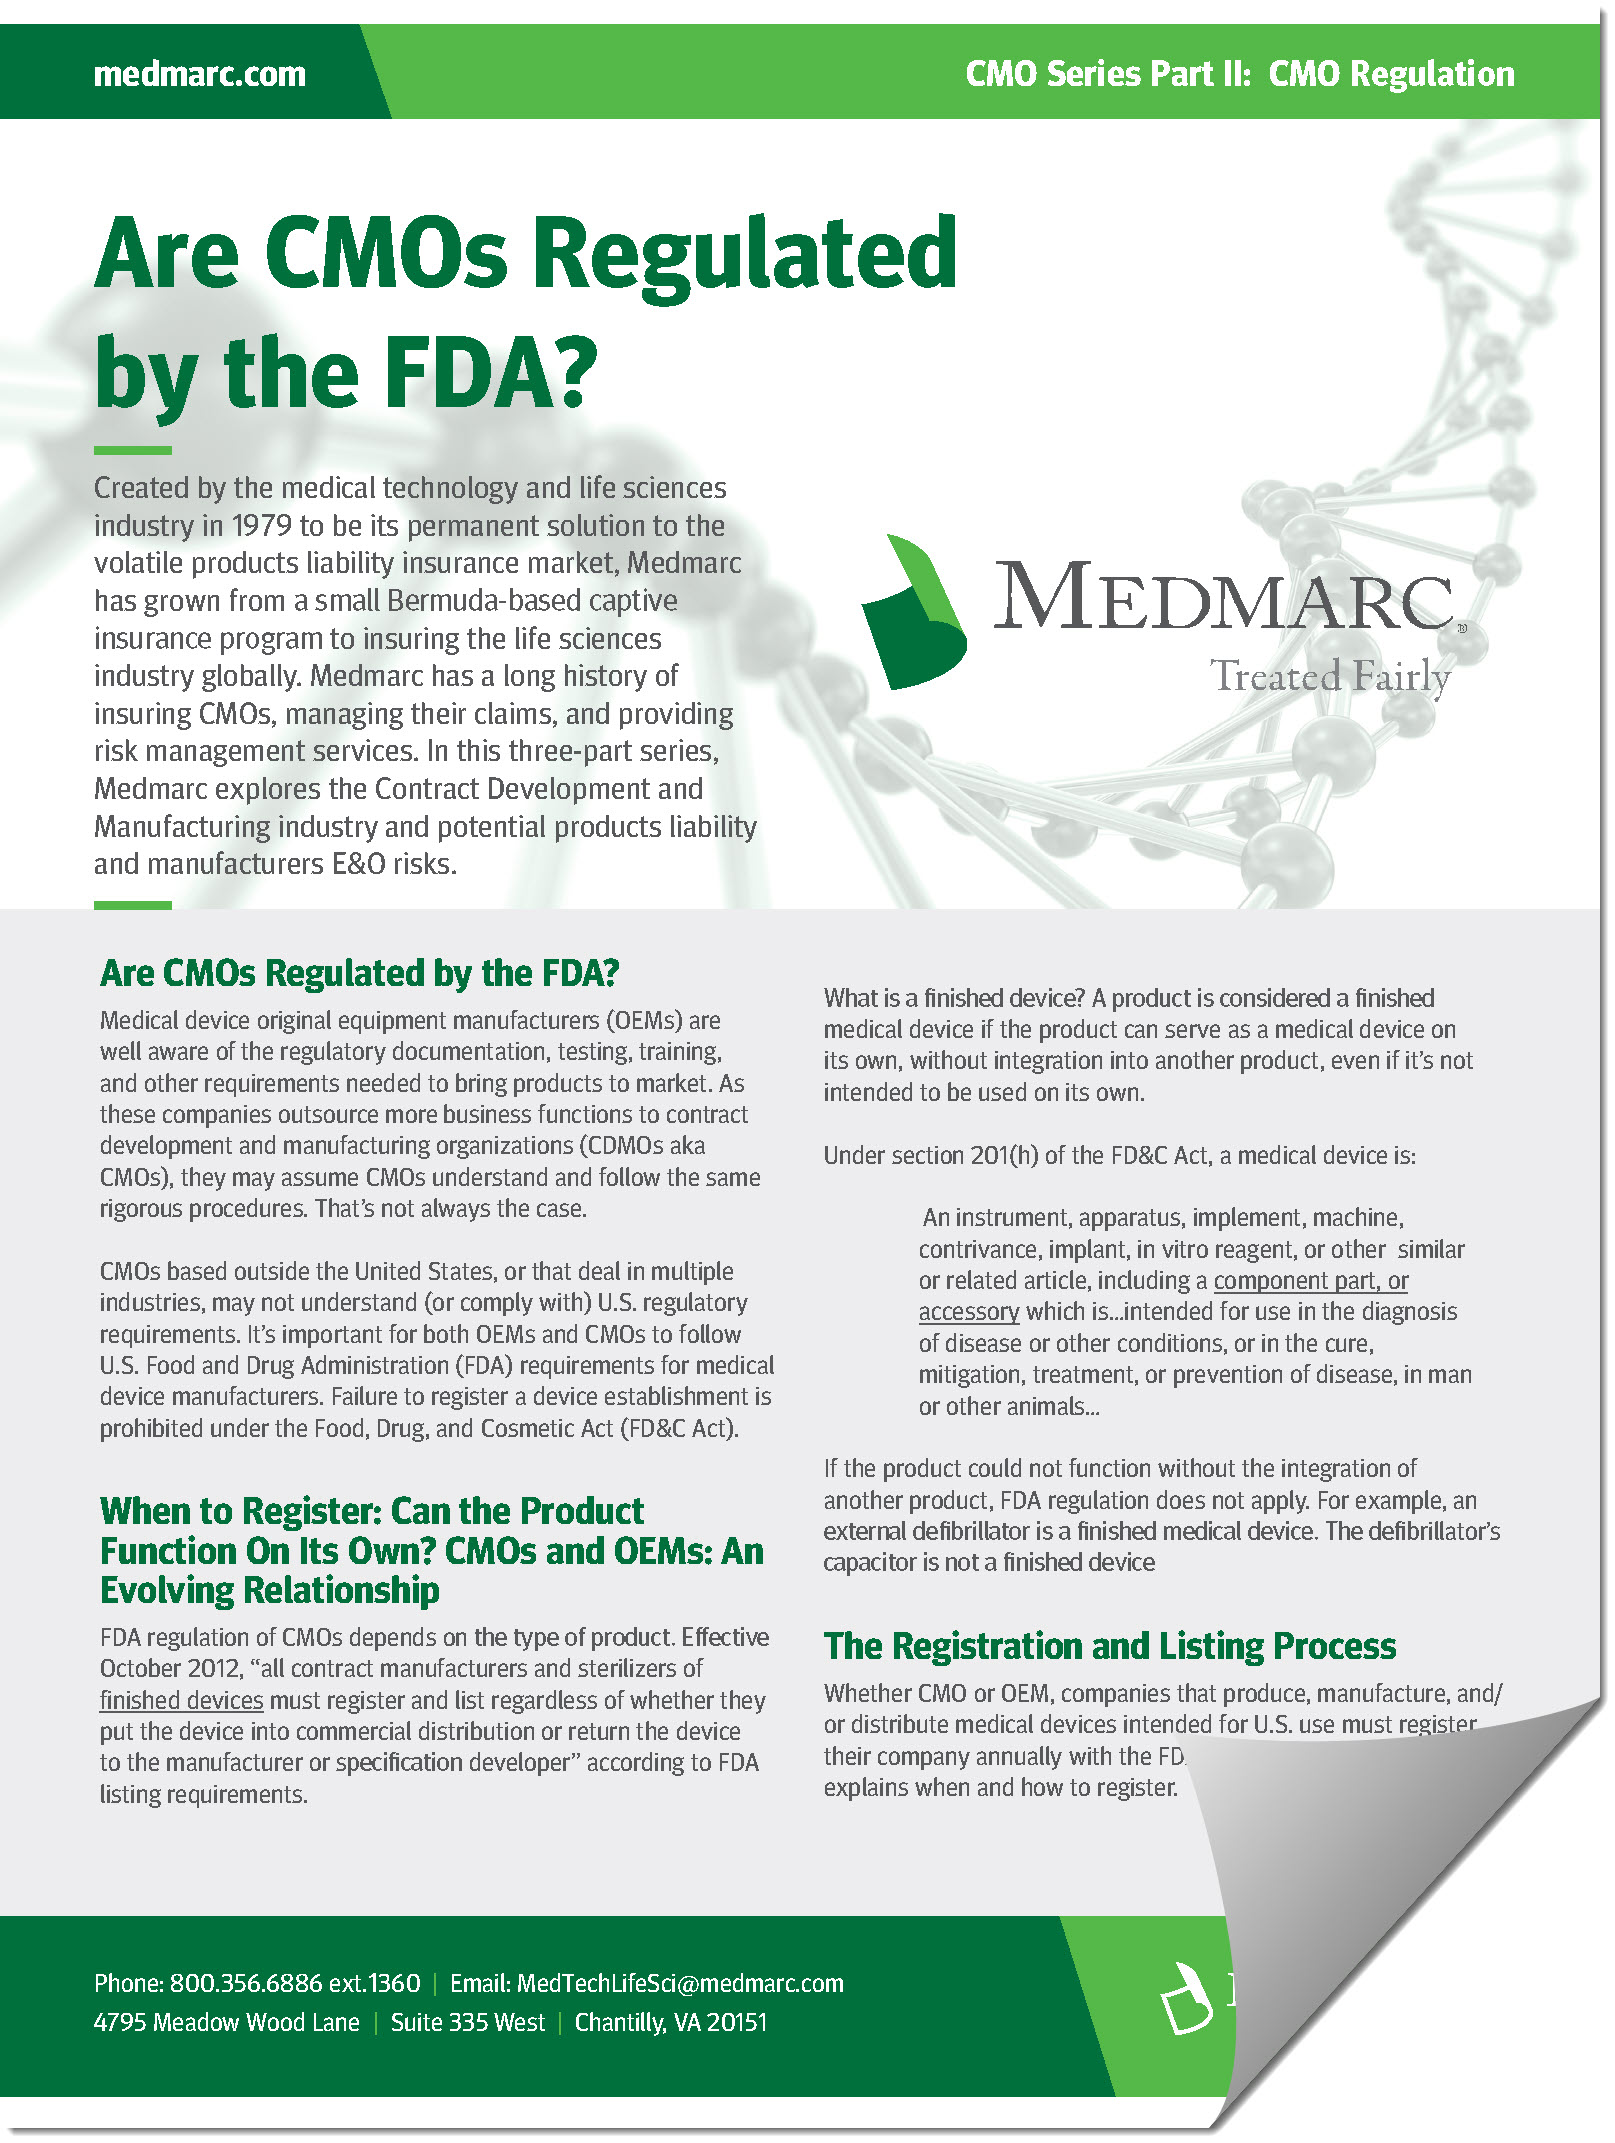 Download The CMO FDA Regulation - Are CMOs Regulated by the FDA